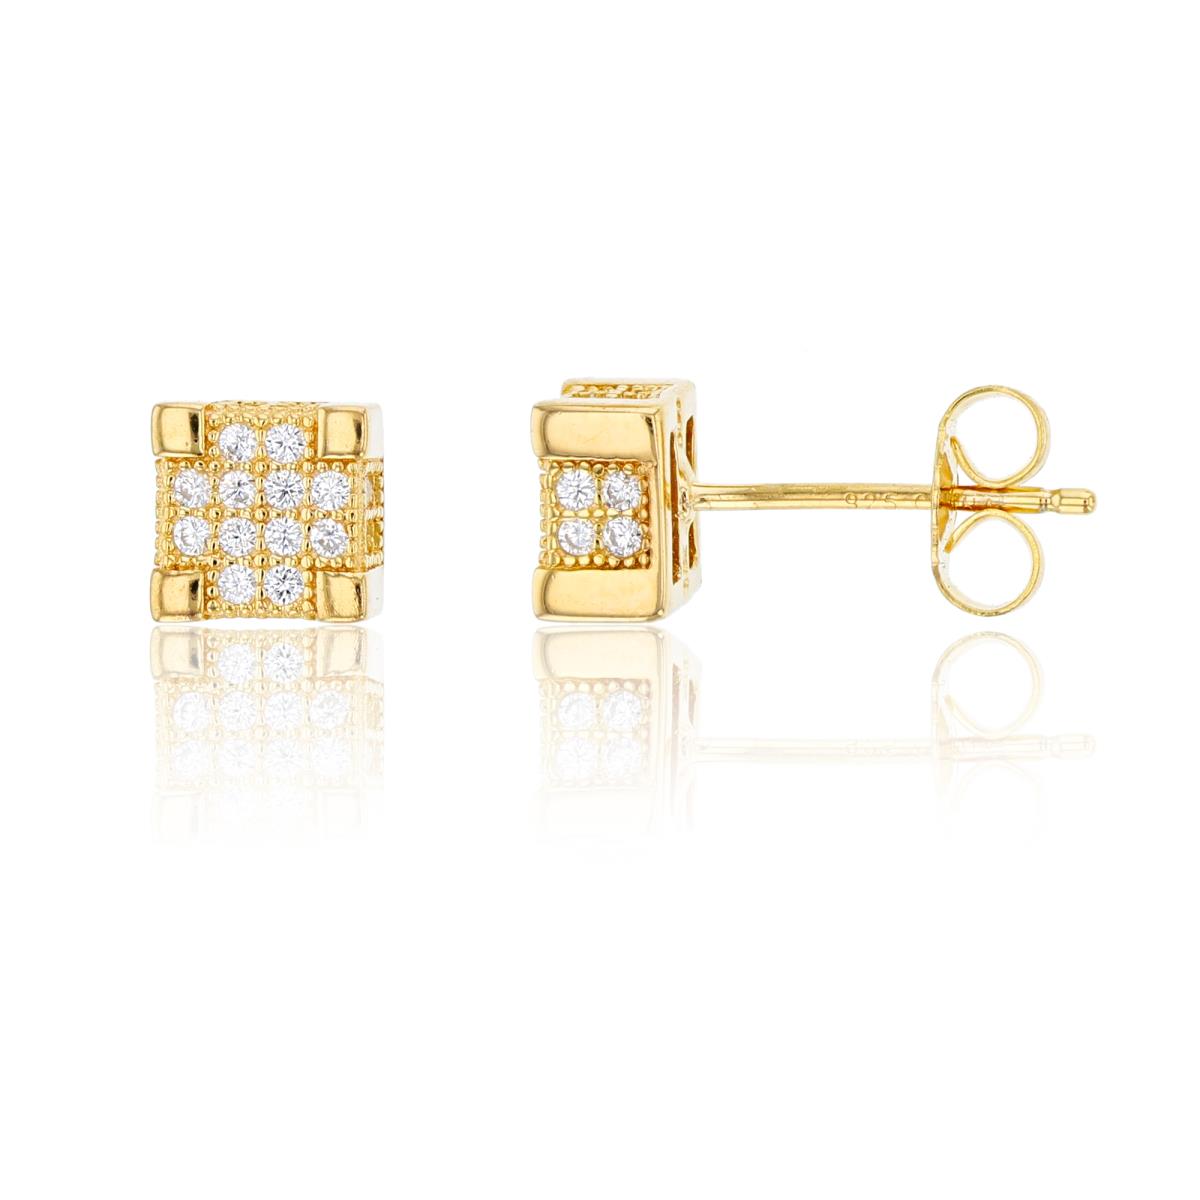 Sterling Silver Yellow 7x7 3D Square Micropave Stud